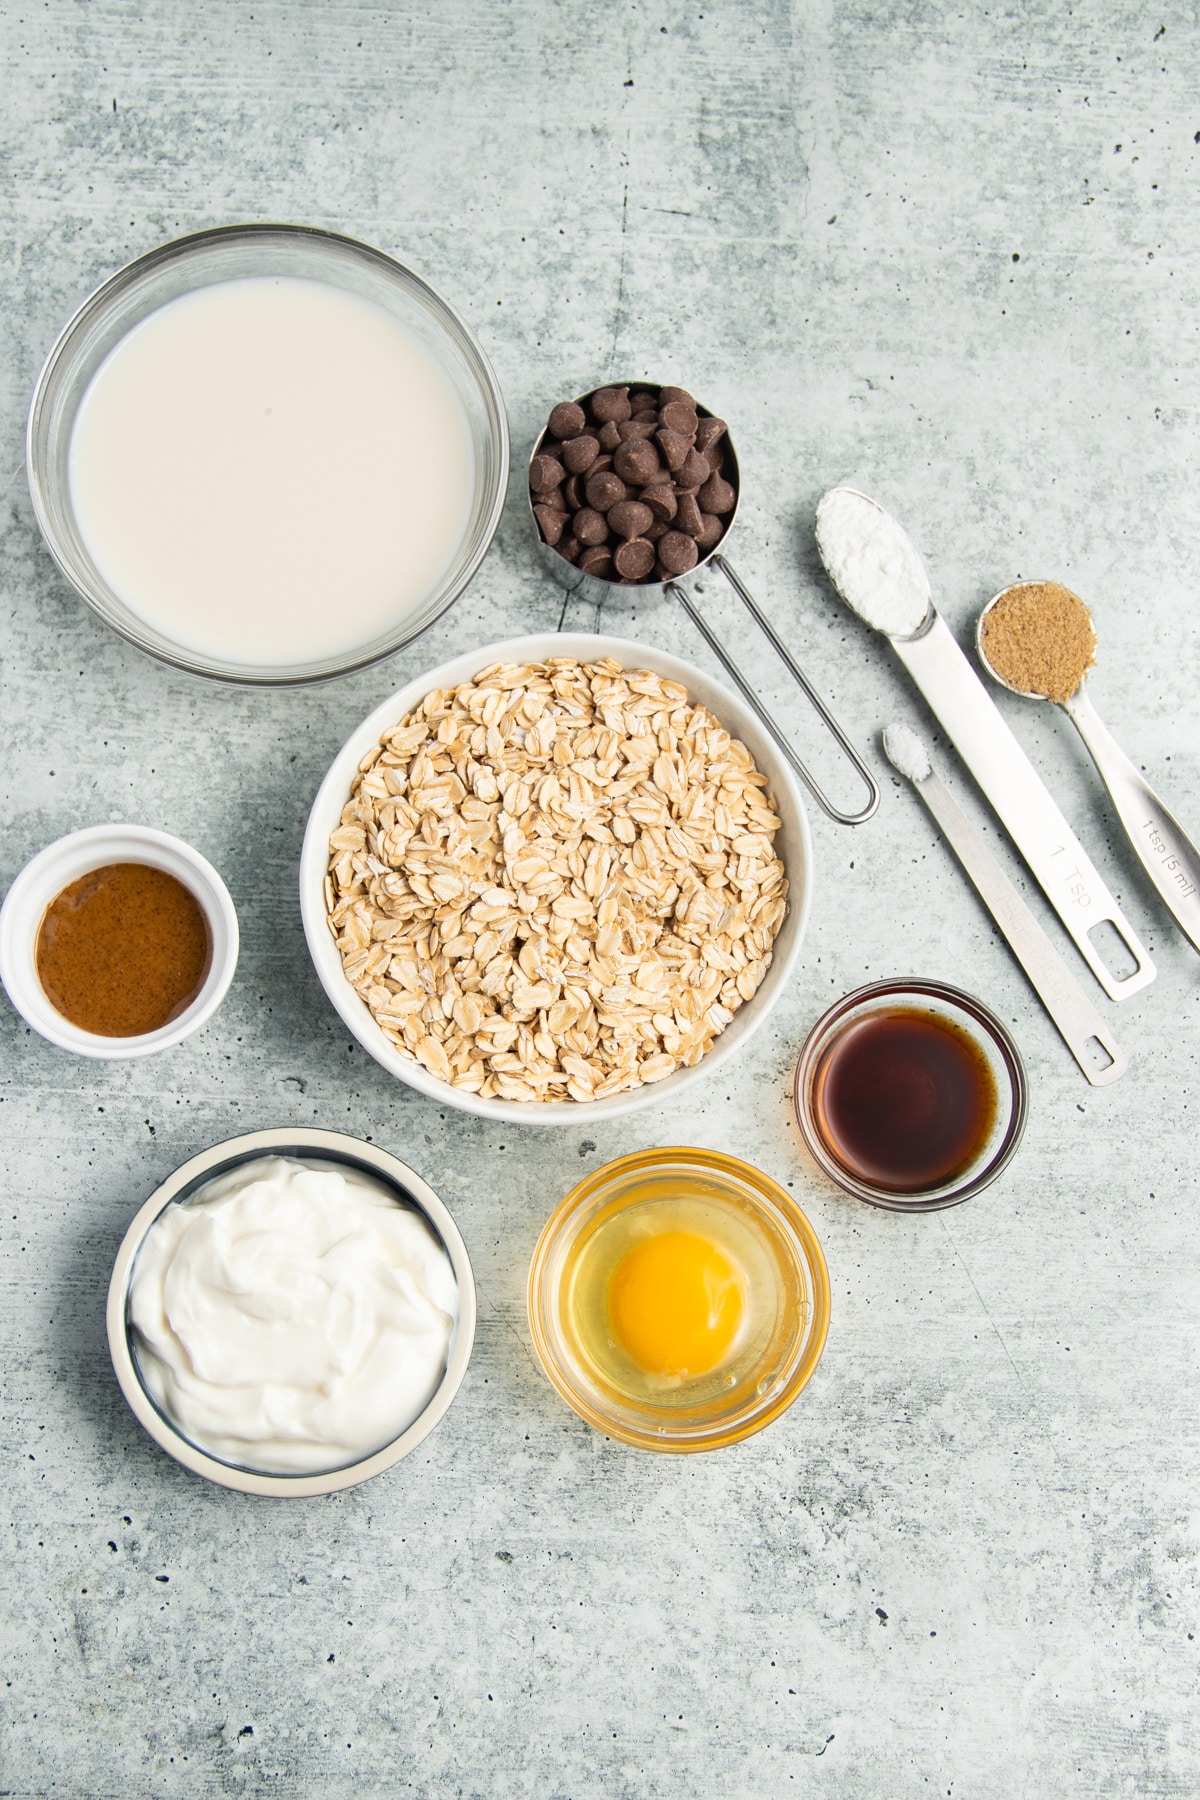 This is a picture of all the ingredients needed to make baked oats without banana.